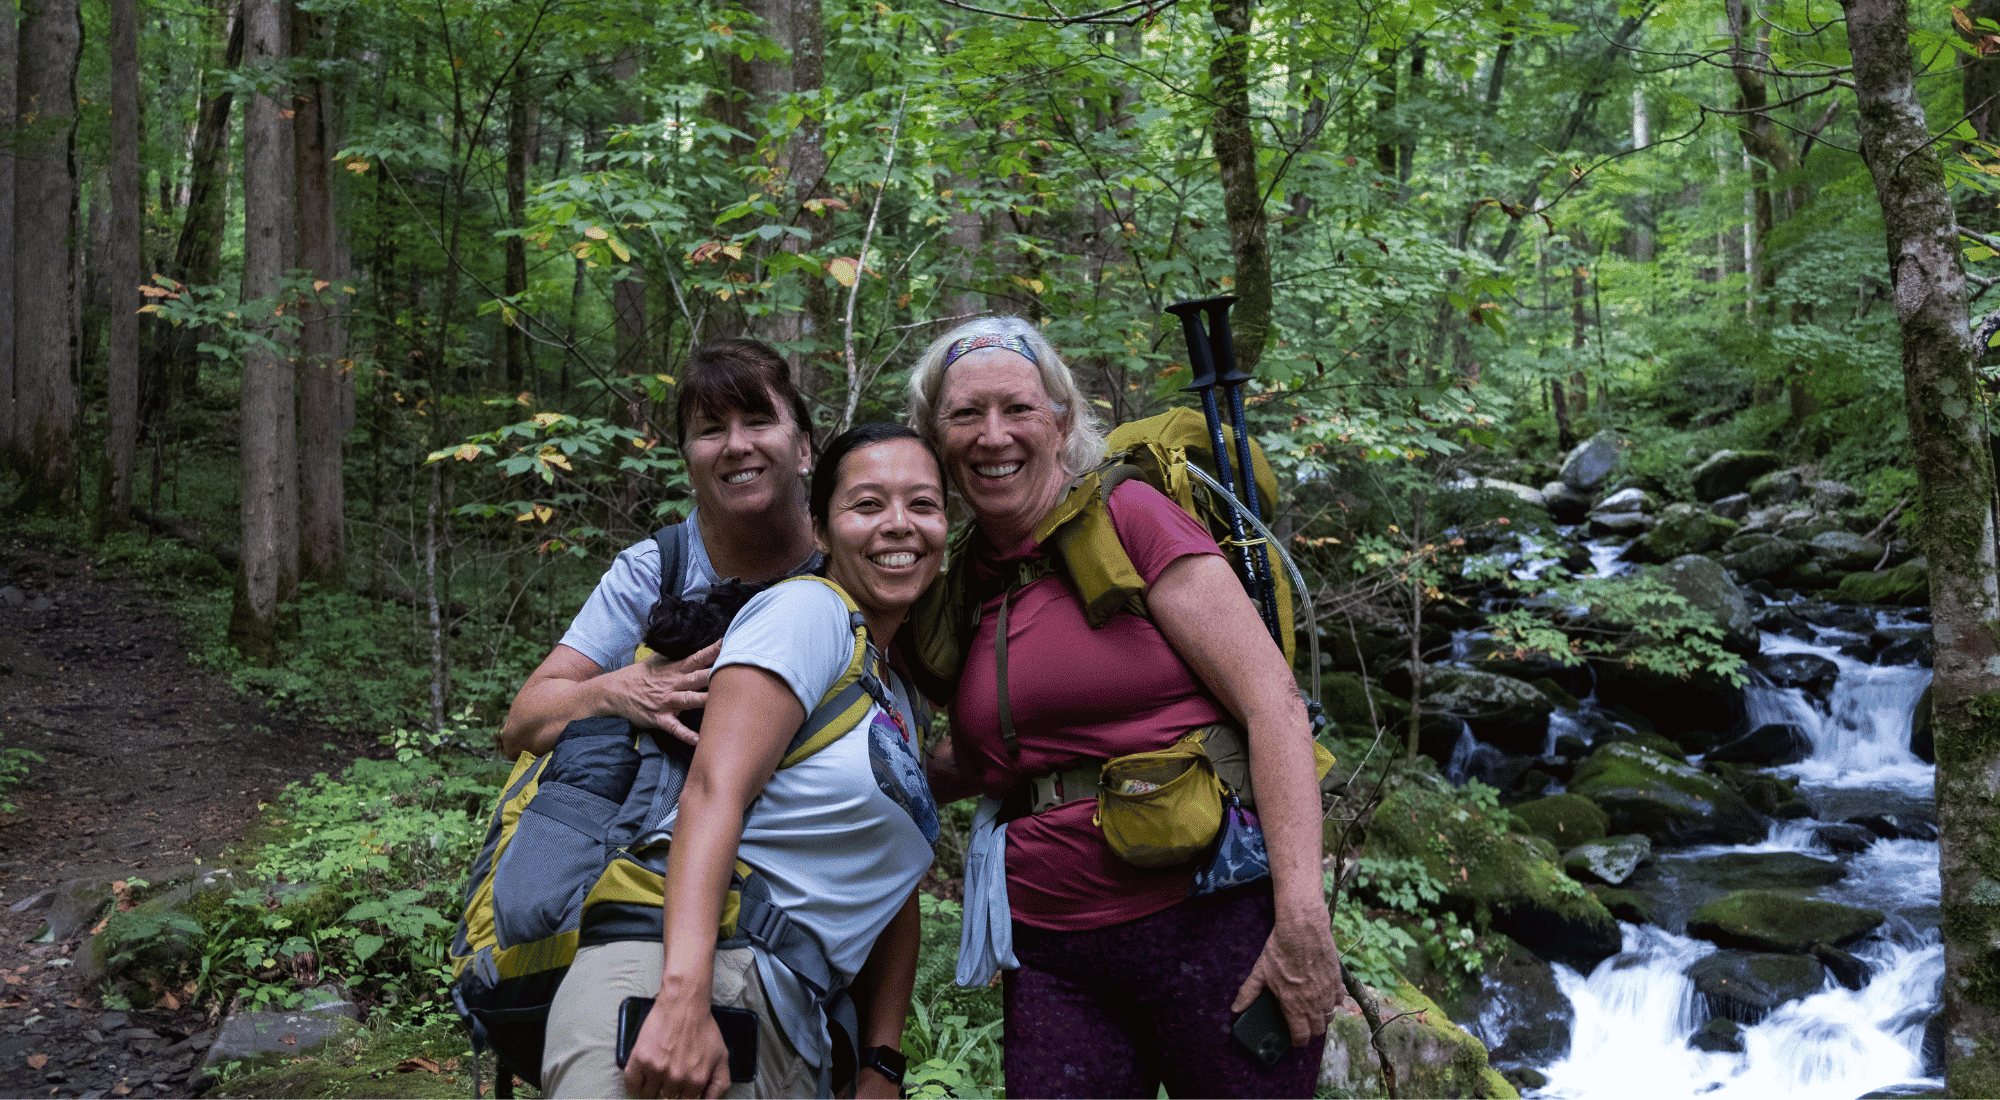 Women’s Smoky Mountain Boots and Roots Hiking Trip